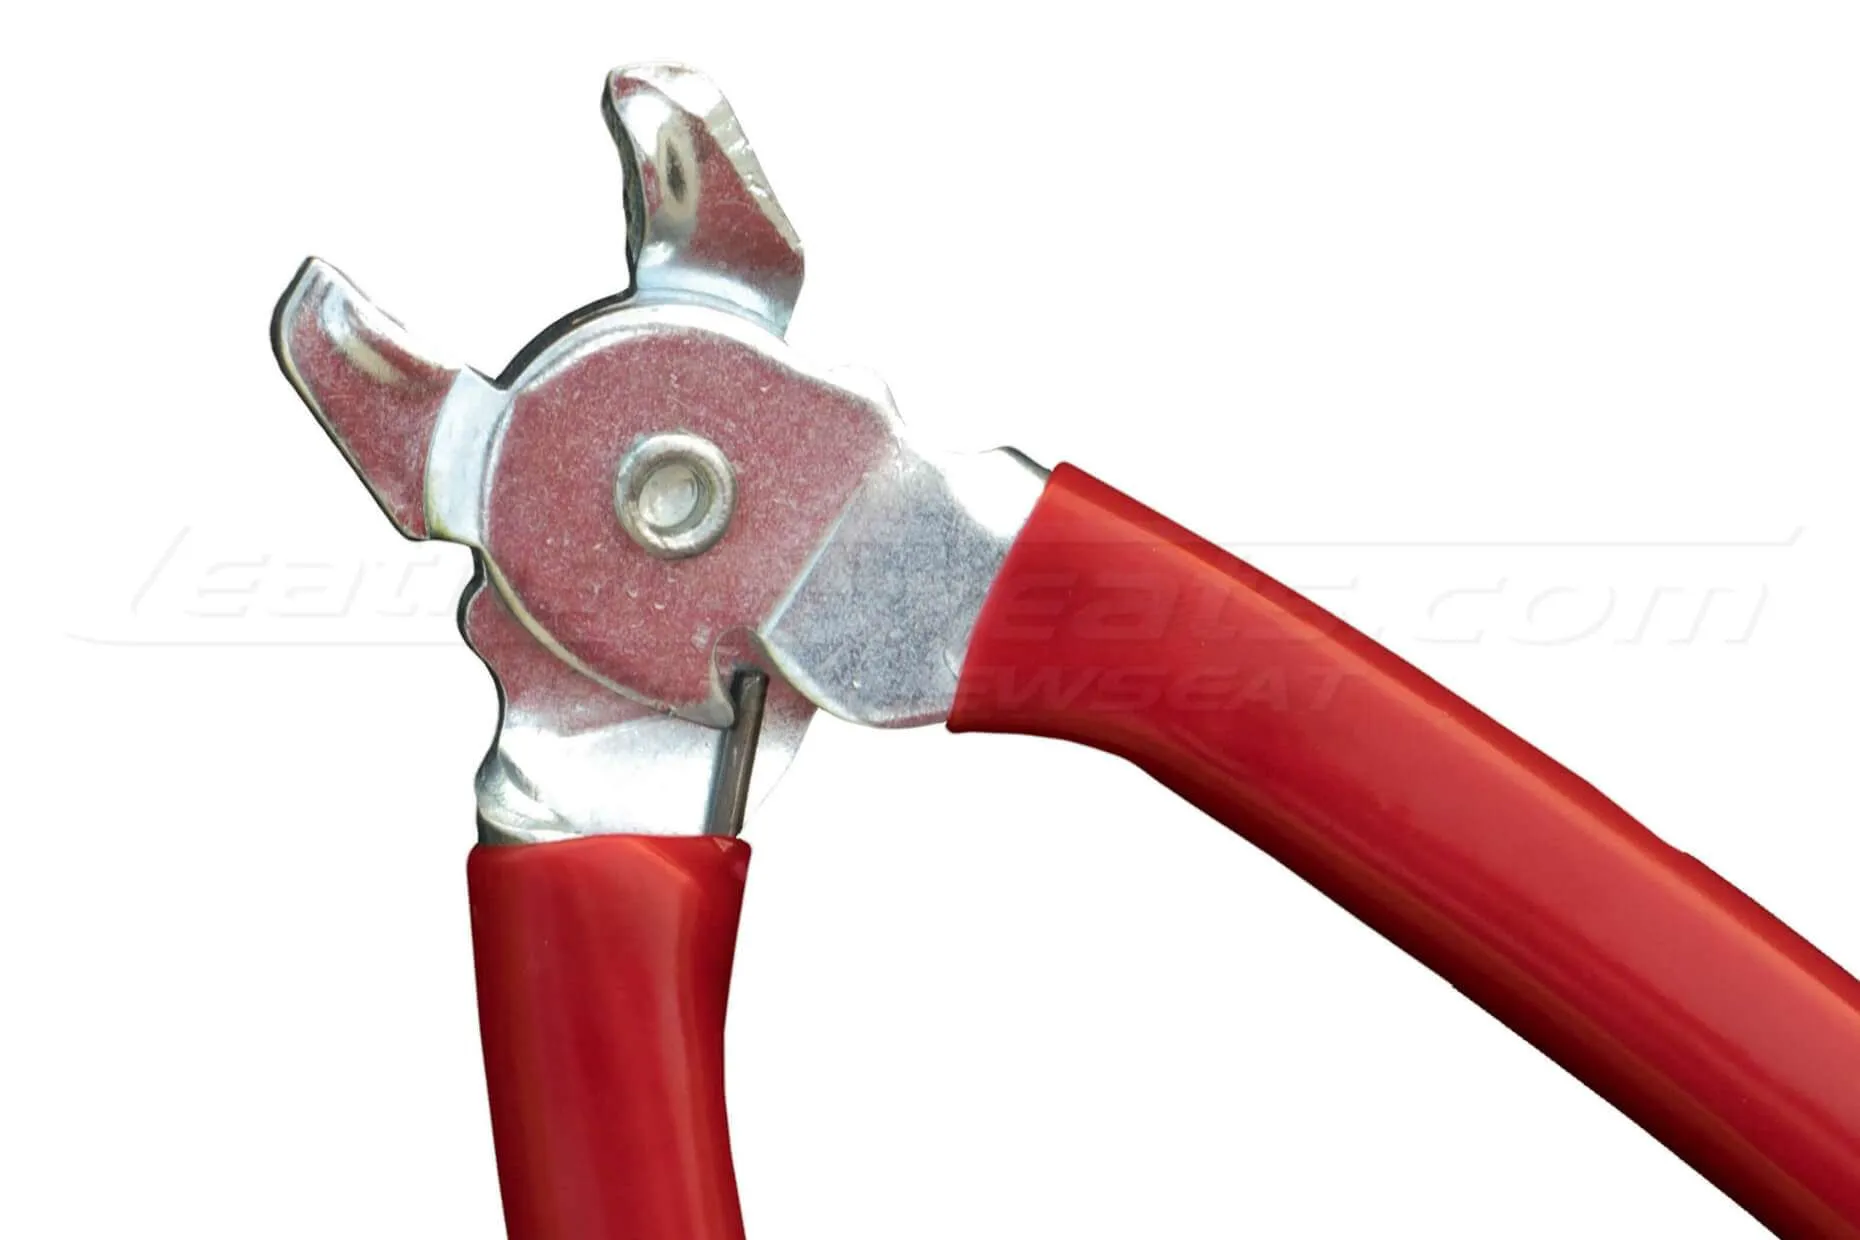 Hog- Ring Pliers close-up